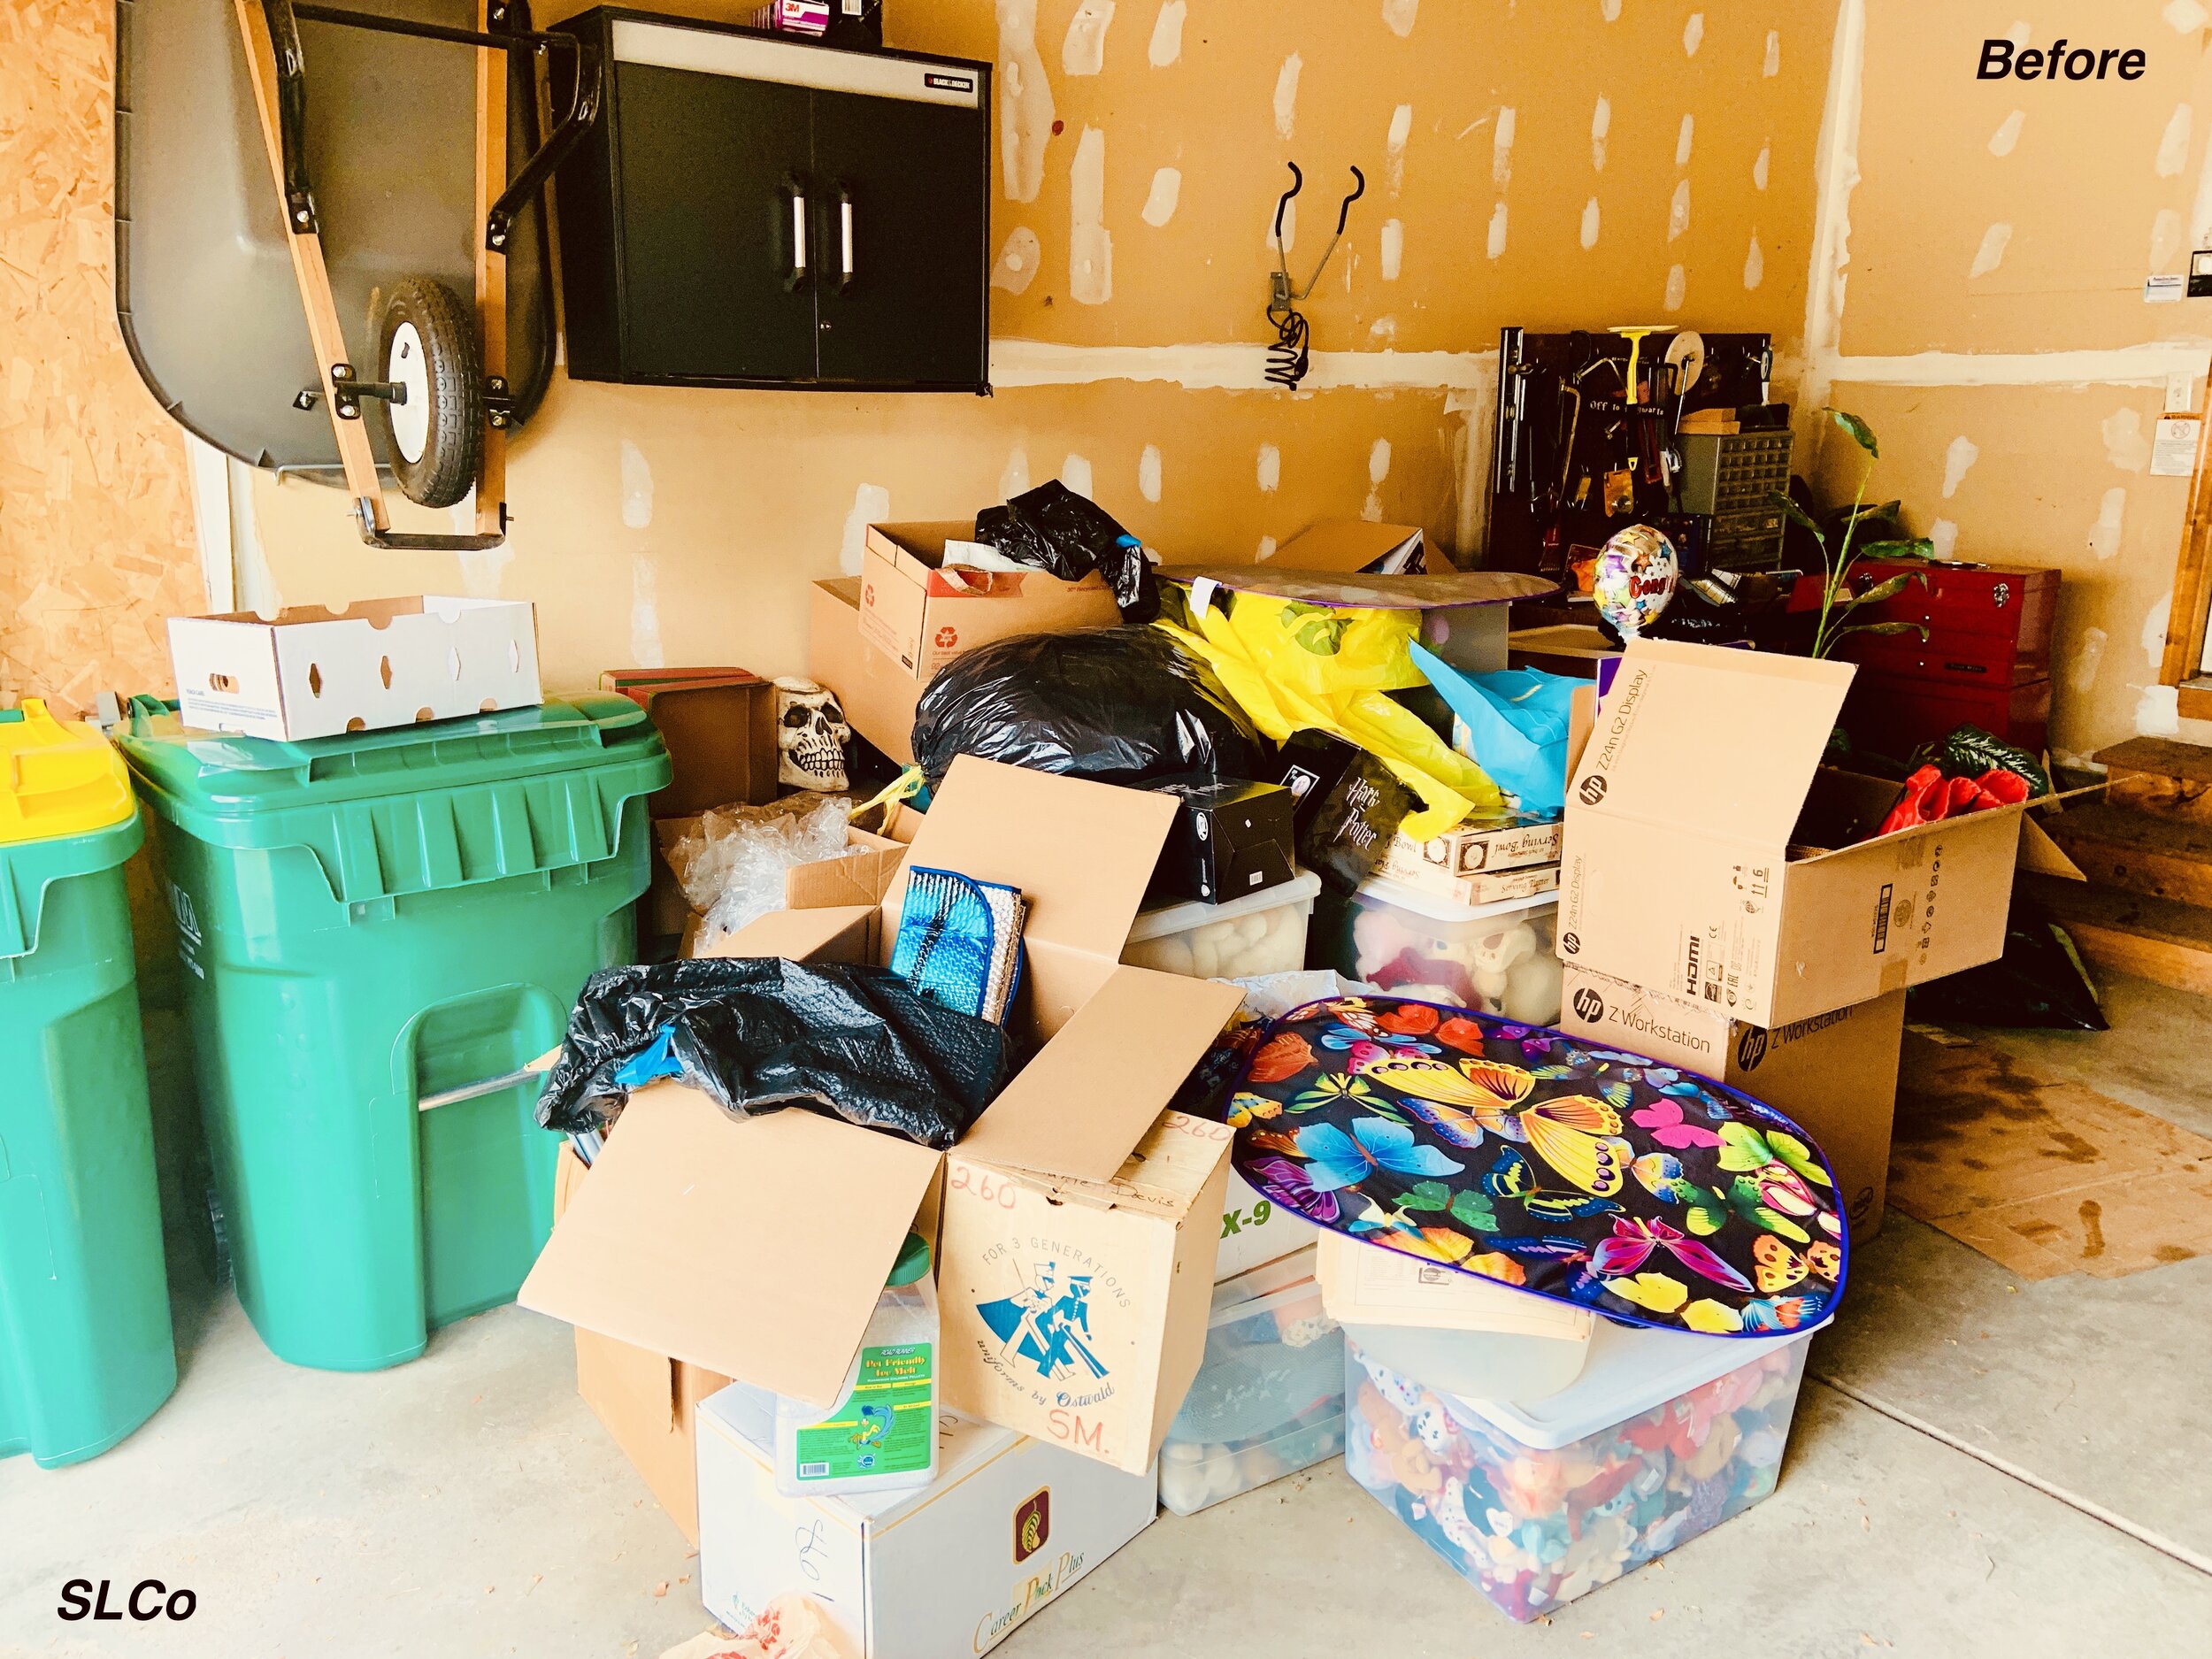 Before photo of garage with green trash bins and containers overflowing and moving boxes stacked on top with random items.